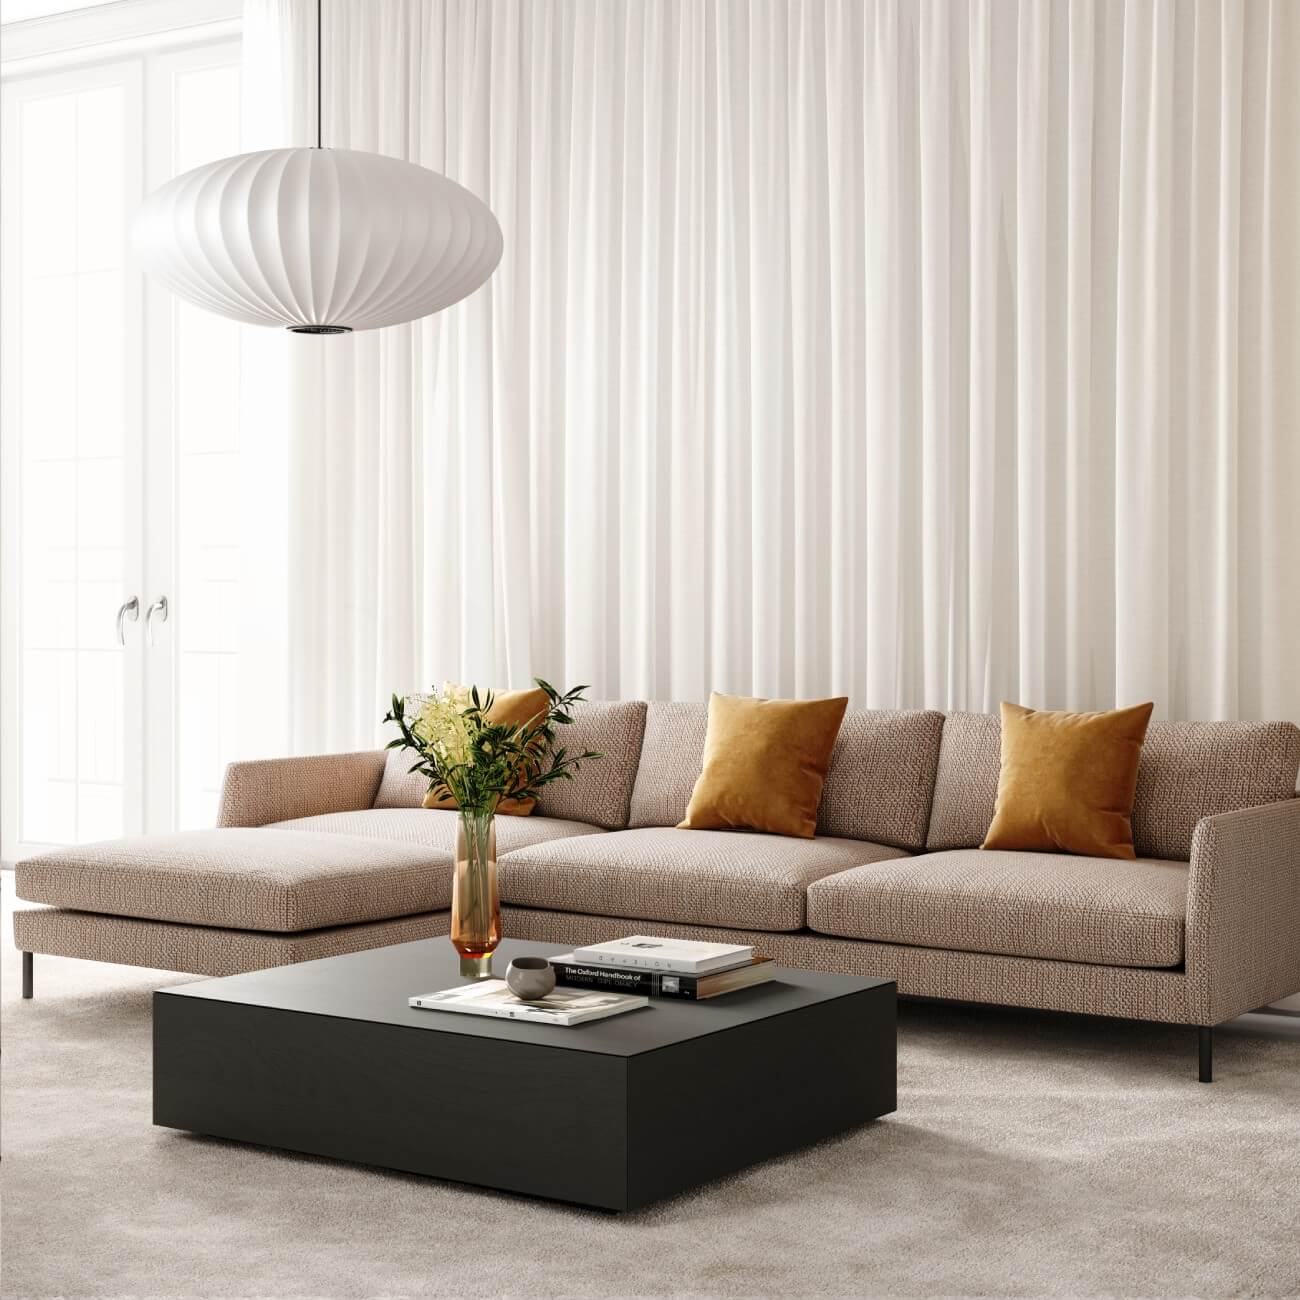 Cream sofa and chaise with a square black coffee table and white curtains in an attractive room